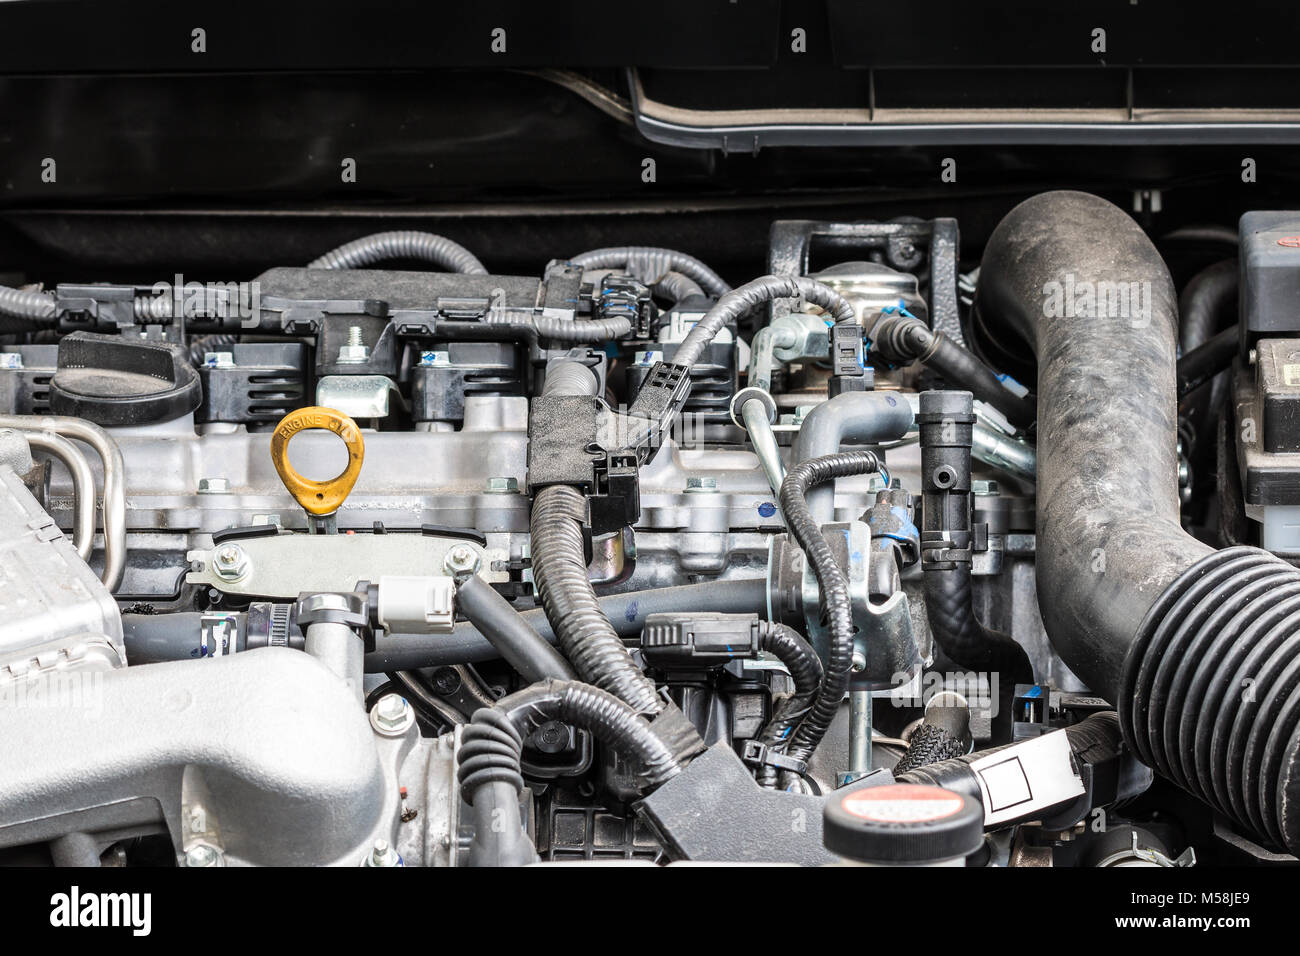 View on engine block of a modern car Stock Photo